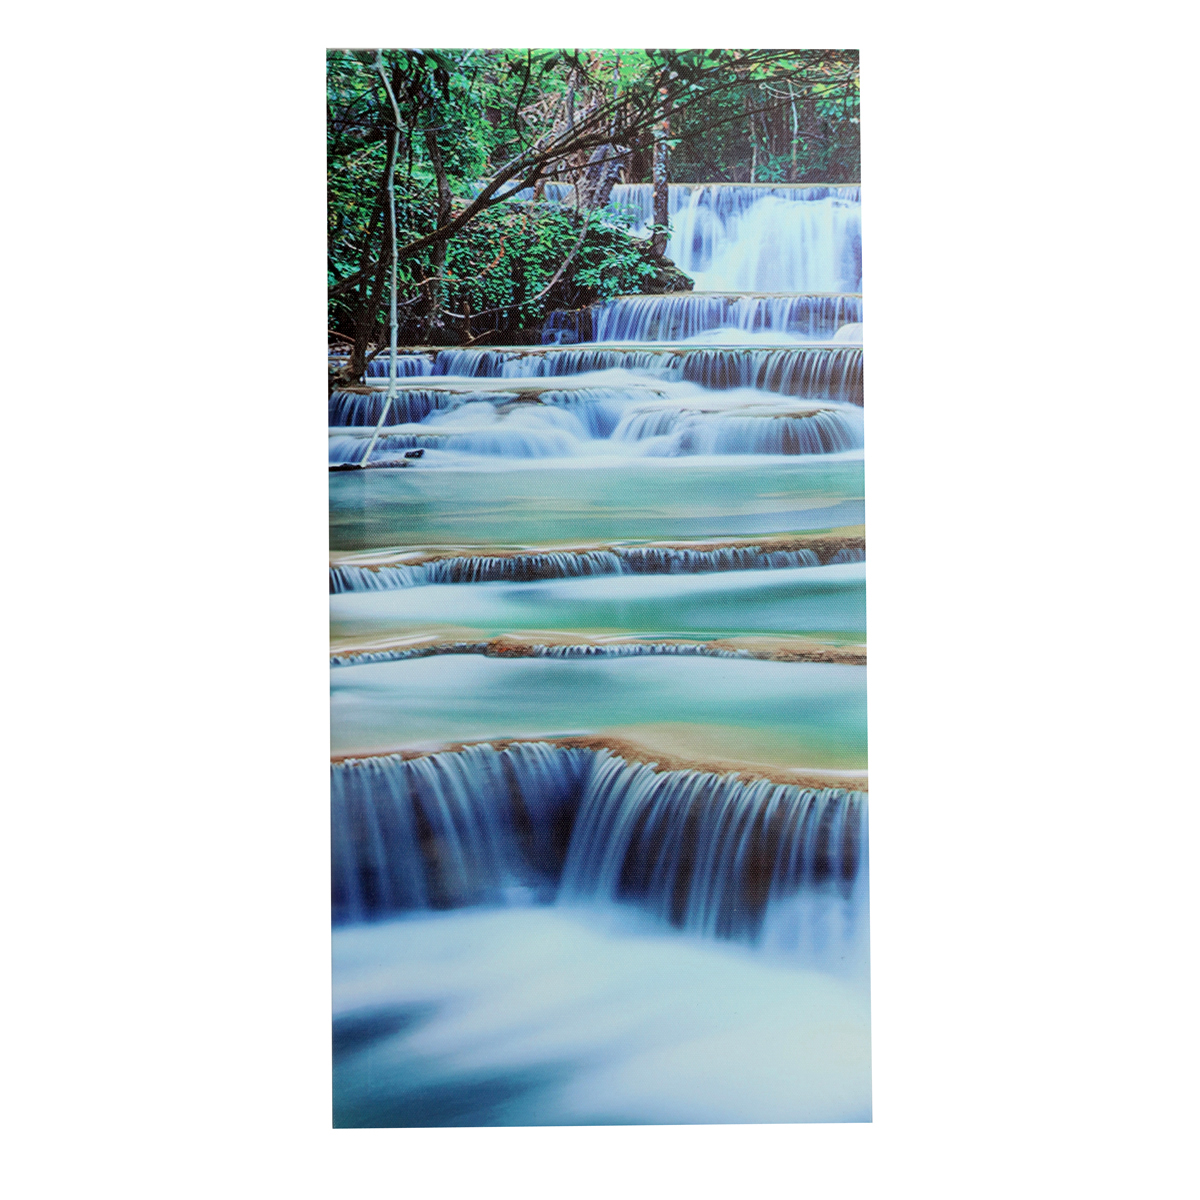 Large-Framed-Canvas-Prints-Forest-Waterfall-Painting-Home-Hanging-Wall-Decorations-1444004-6